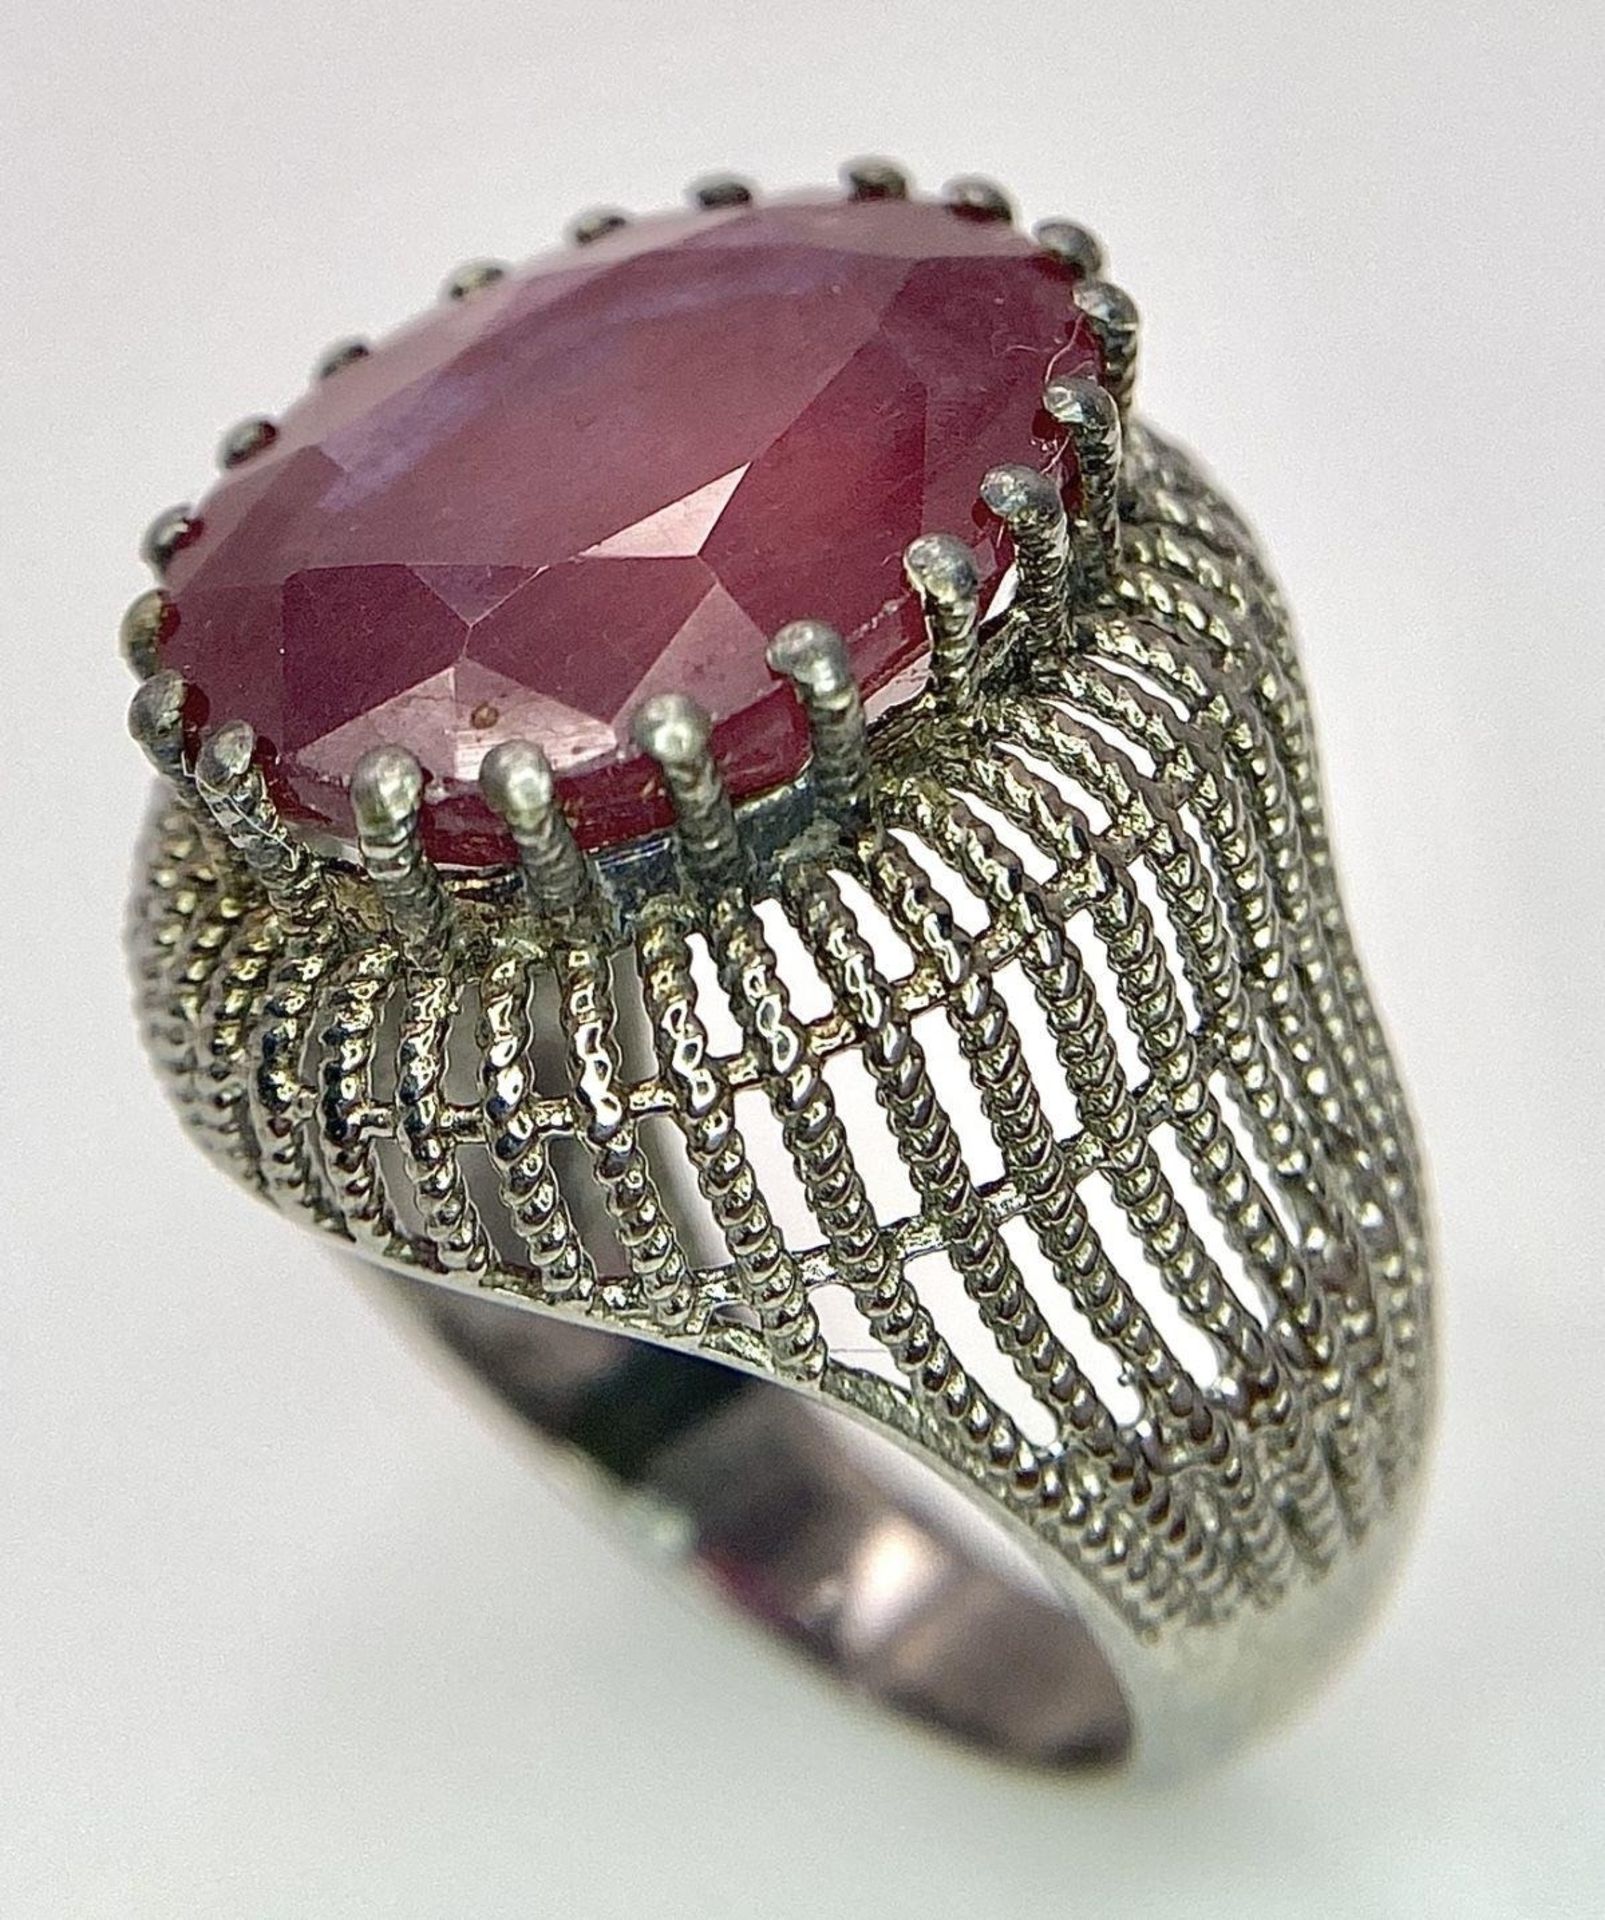 A Vintage Style 12ct Ruby Gemstone Ring set in 925 Silver. Size N. 8g total weight. - Bild 5 aus 6